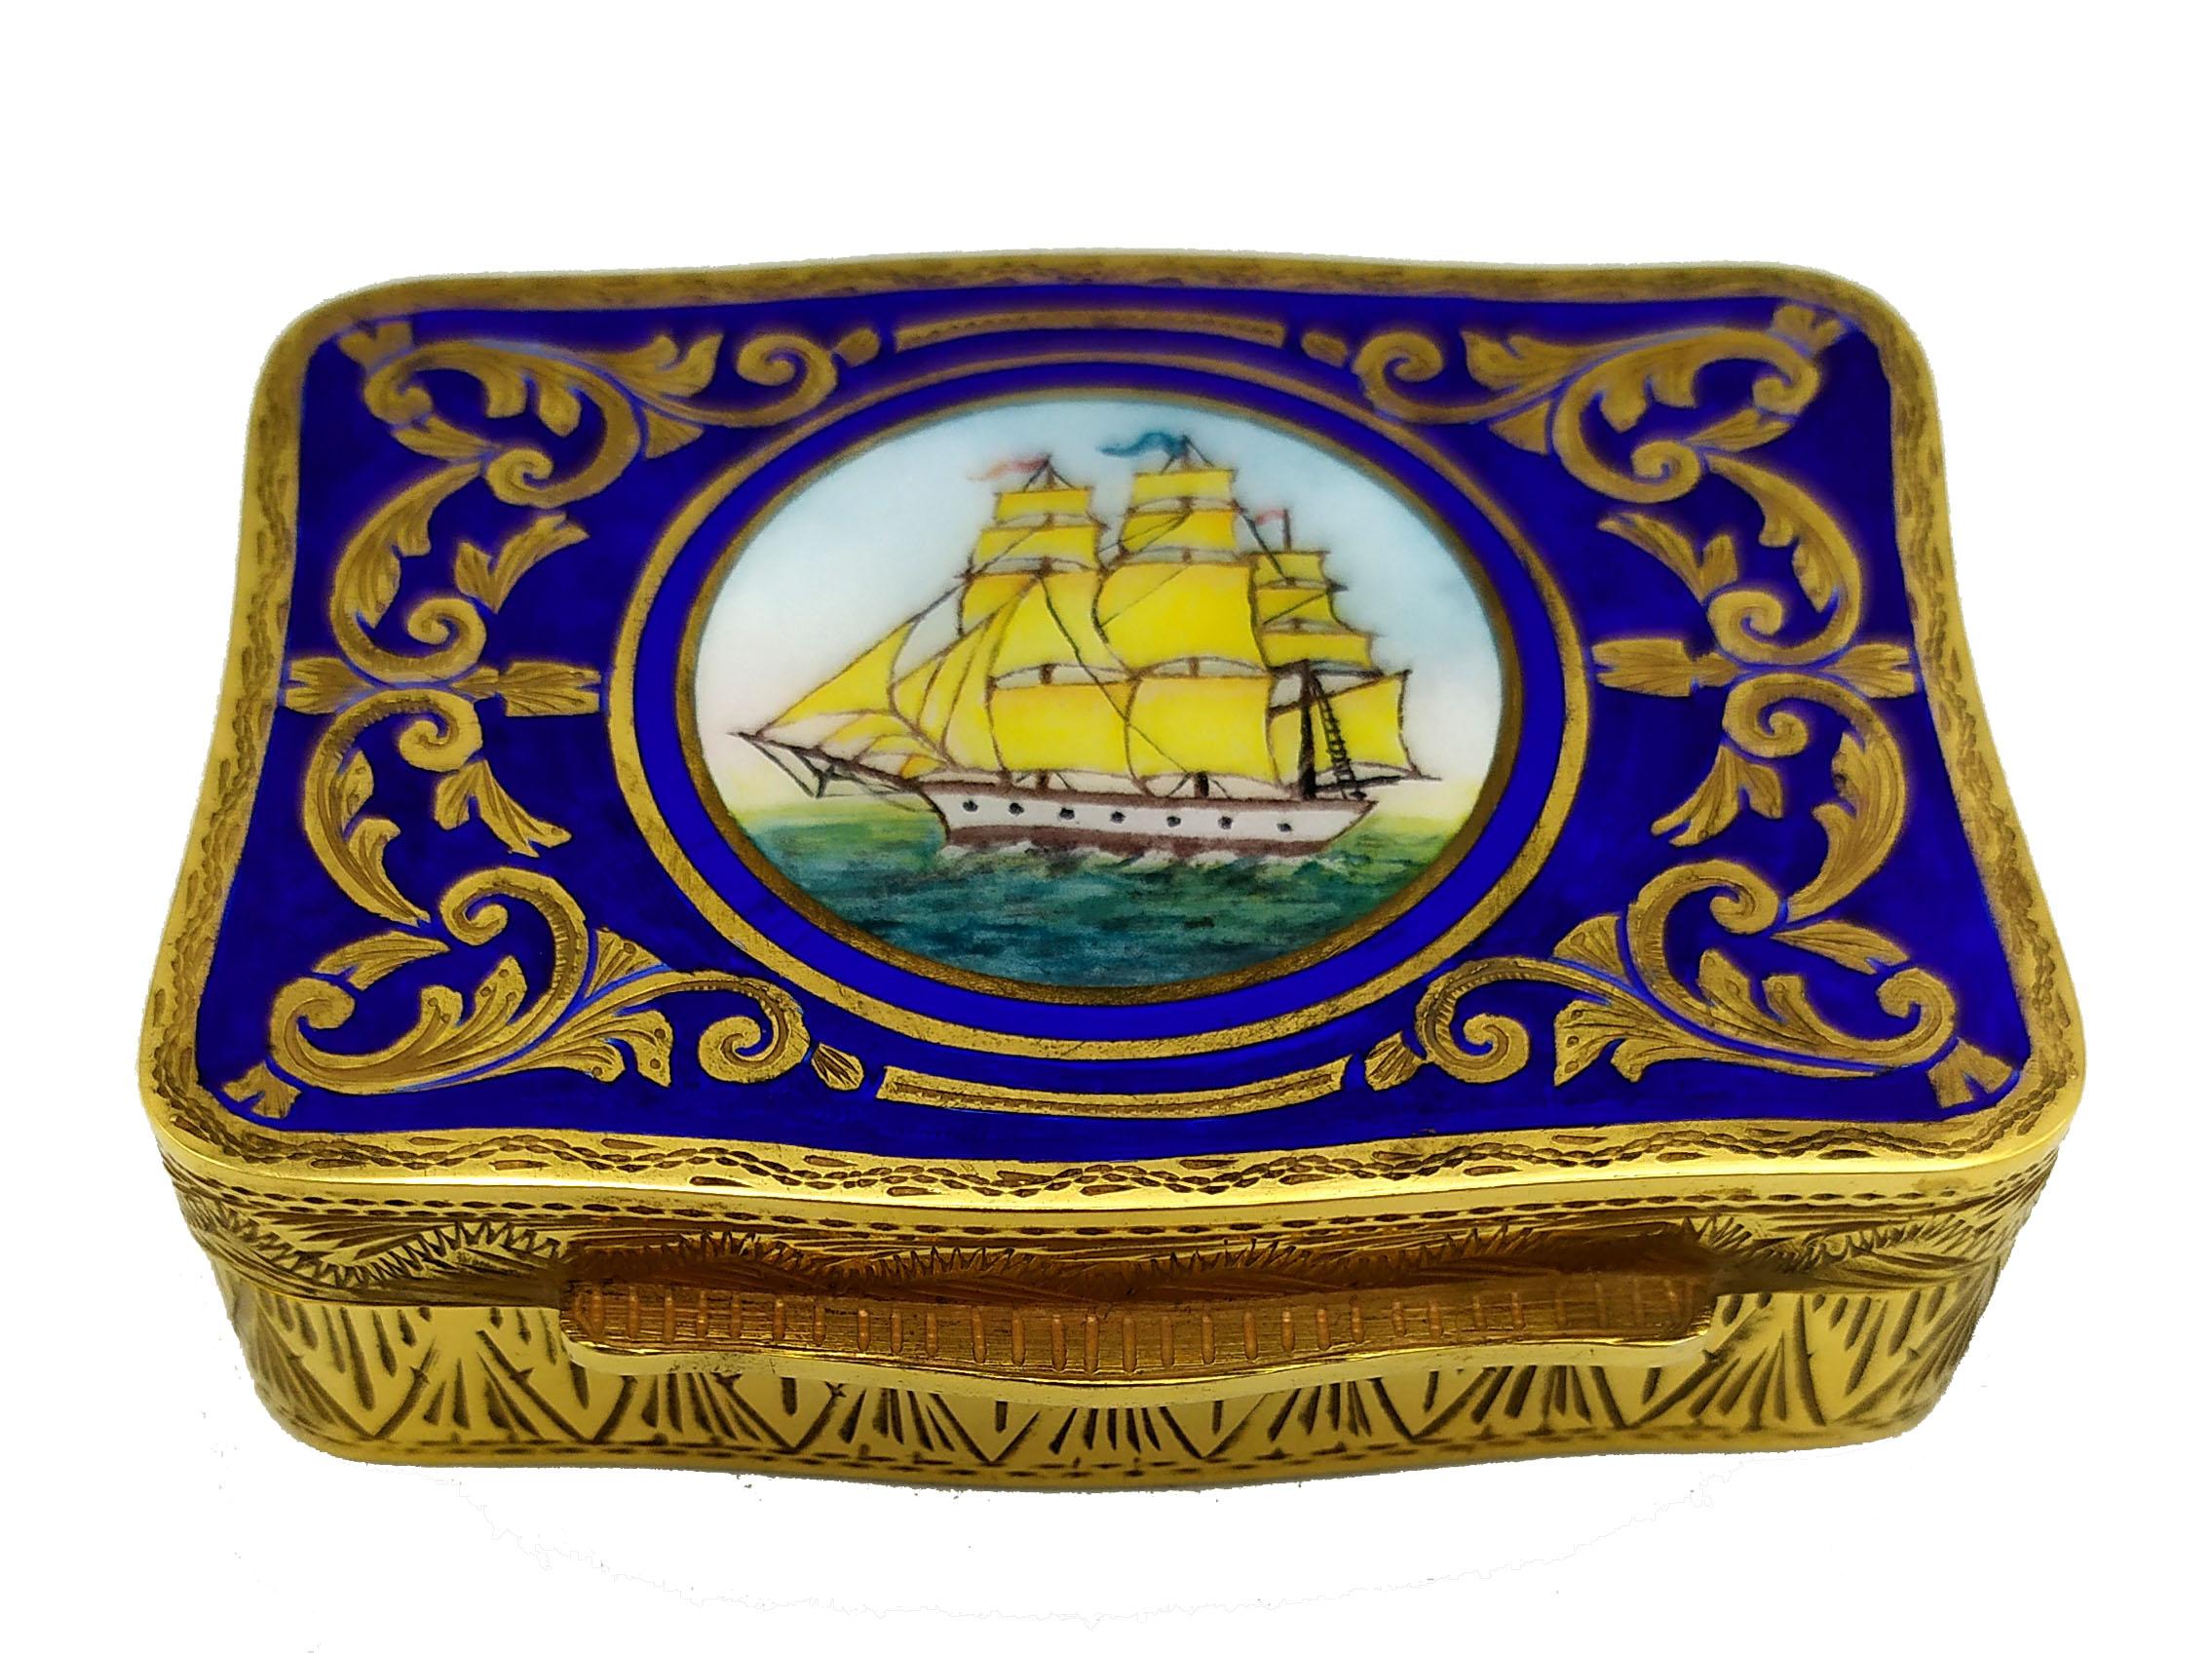 Baroque Snuffbox Vessel Miniature Hand-Painted Sterling Silver Enamel Salimbeni For Sale